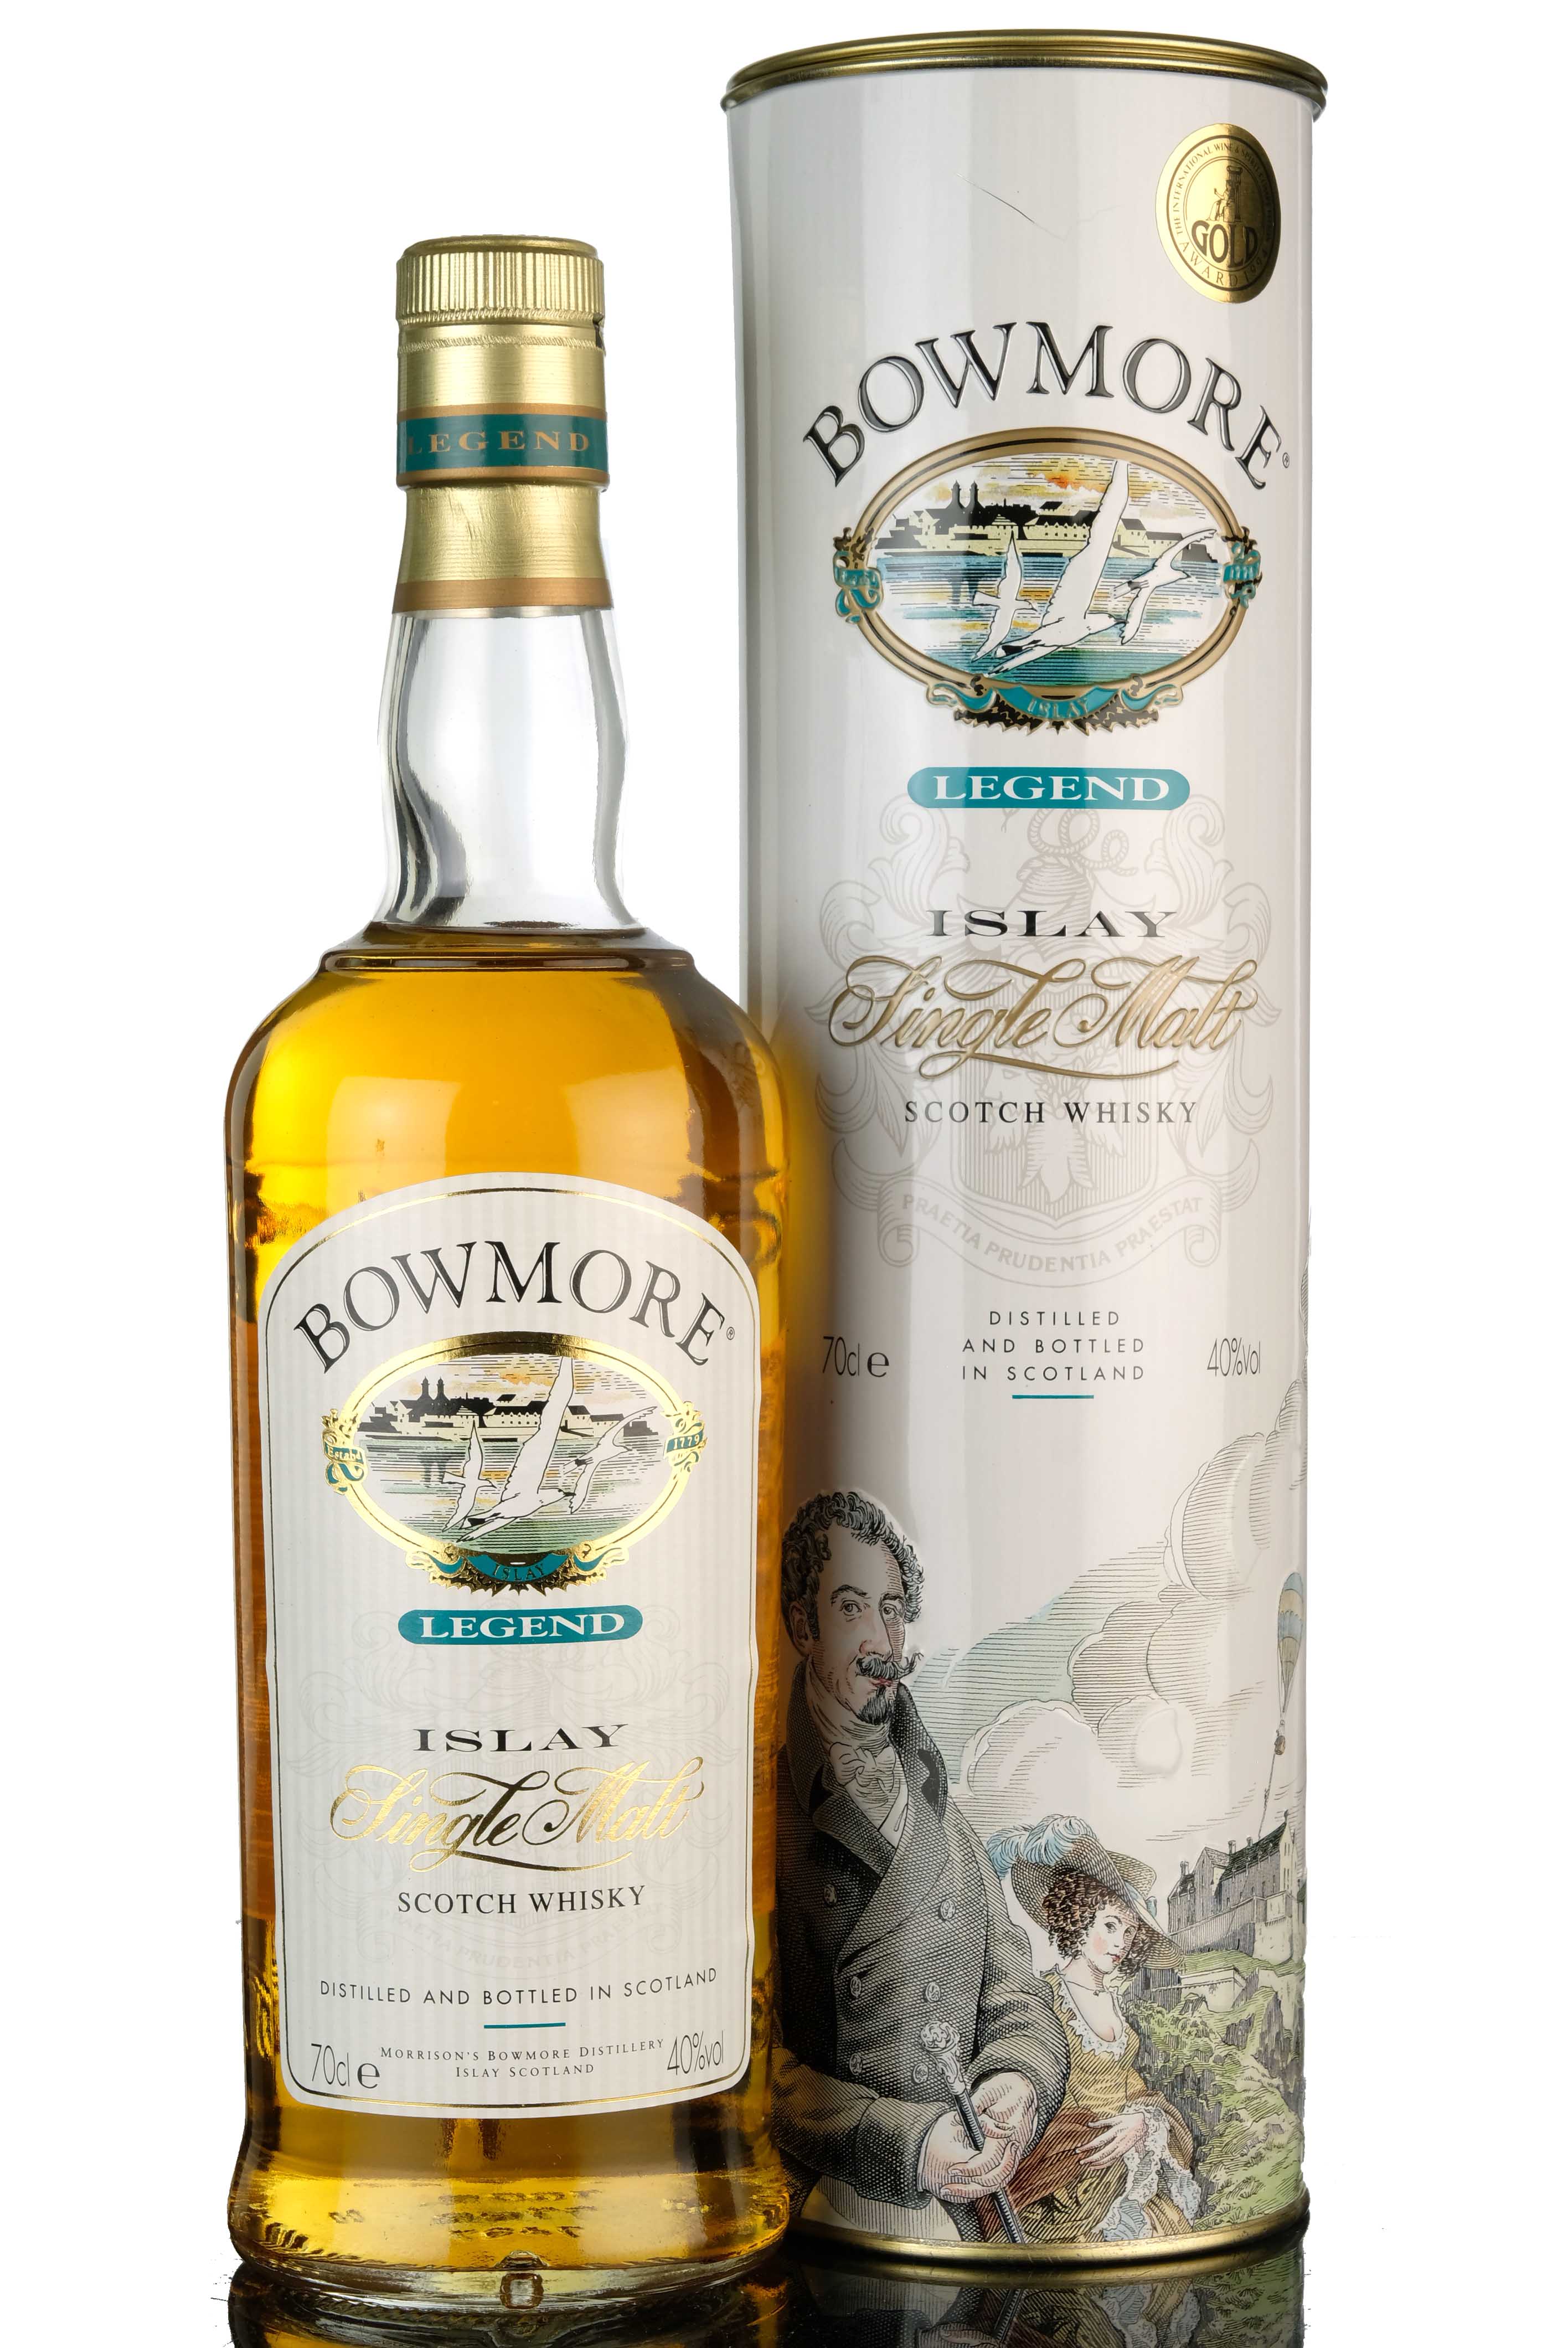 Bowmore Legend - St Ives - 1994 Release - 1st Edition